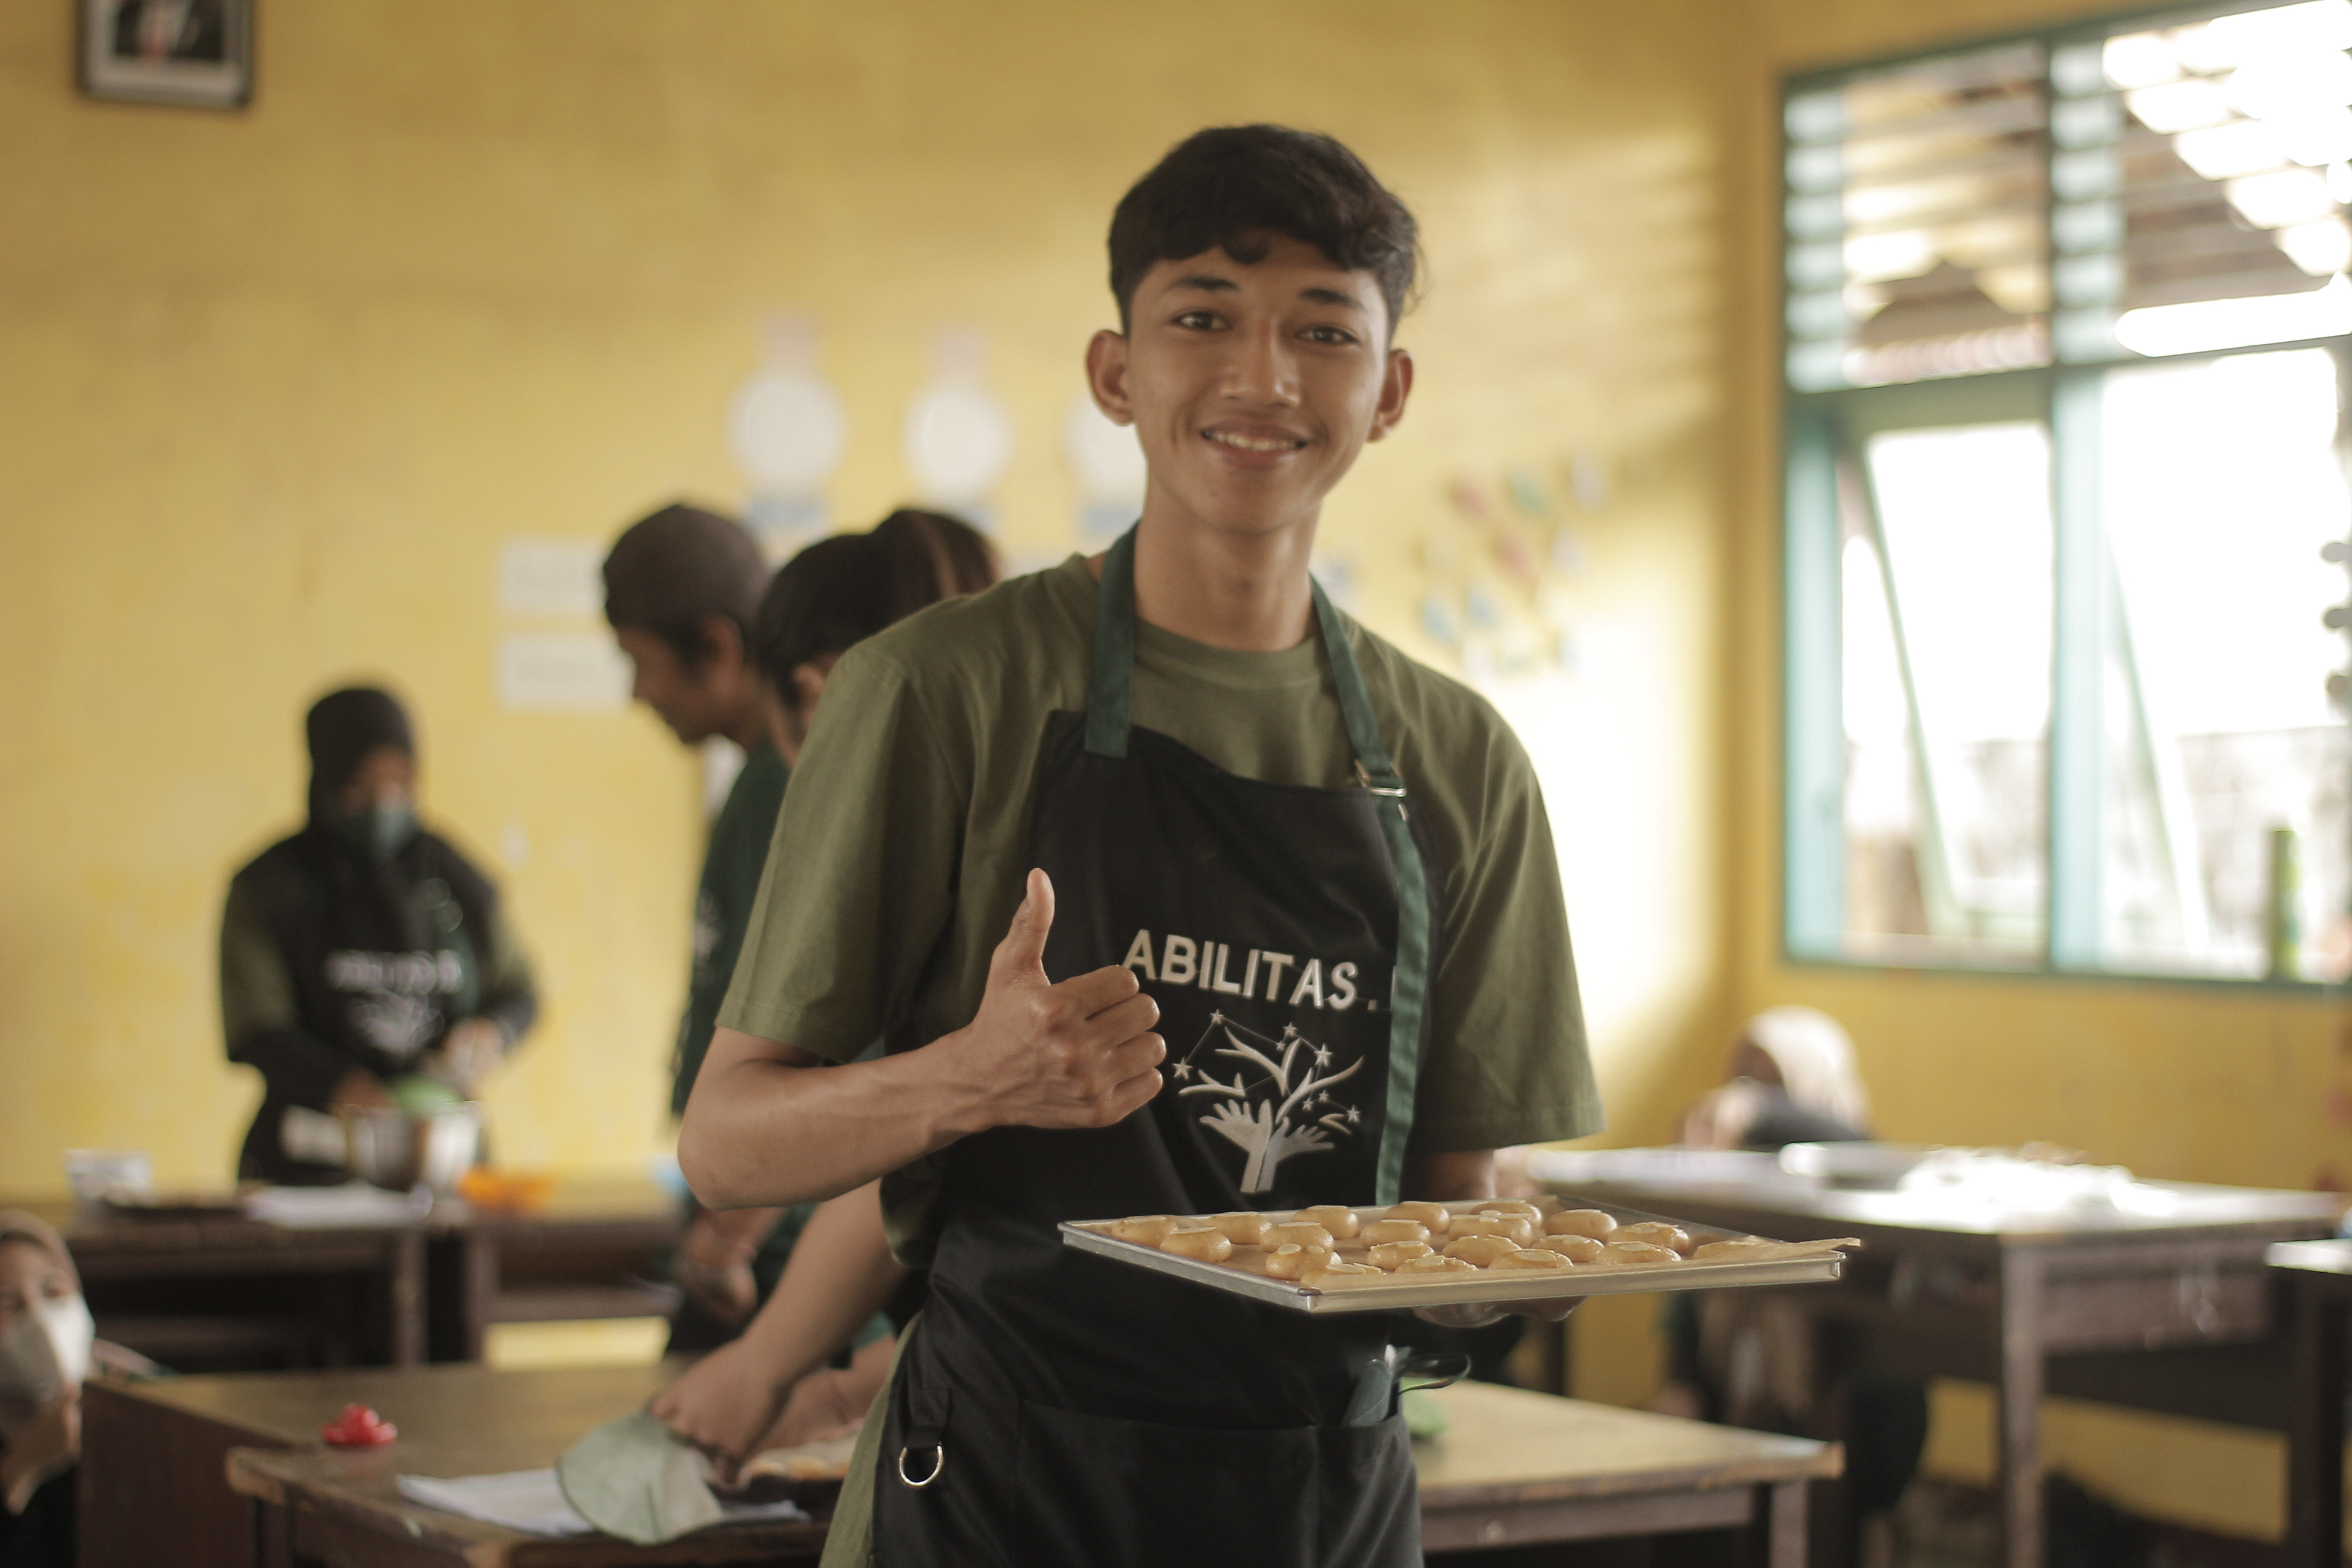 Ari Participant Is Getting Ready To Bake His Peanut Butter Cookies Jpg